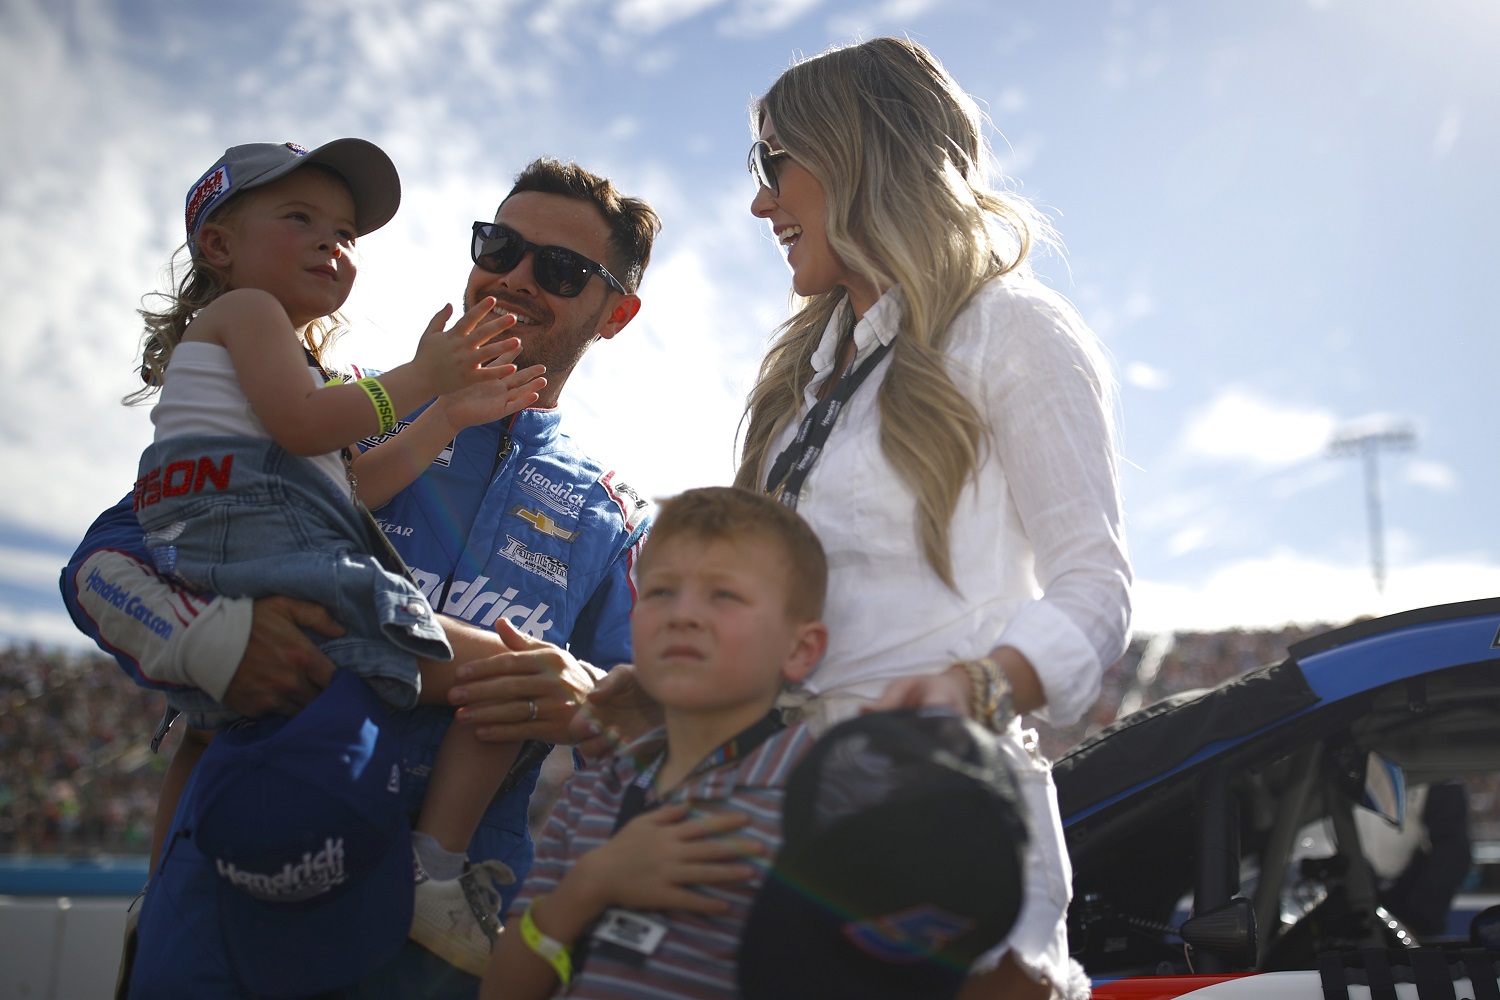 Kyle Larson spends time with wife Katelyn, son,Owen,  and daughter Audrey prior to the NASCAR Cup Series Championship at Phoenix Raceway on Nov. 7, 2021. | Jared C. Tilton/Getty Images